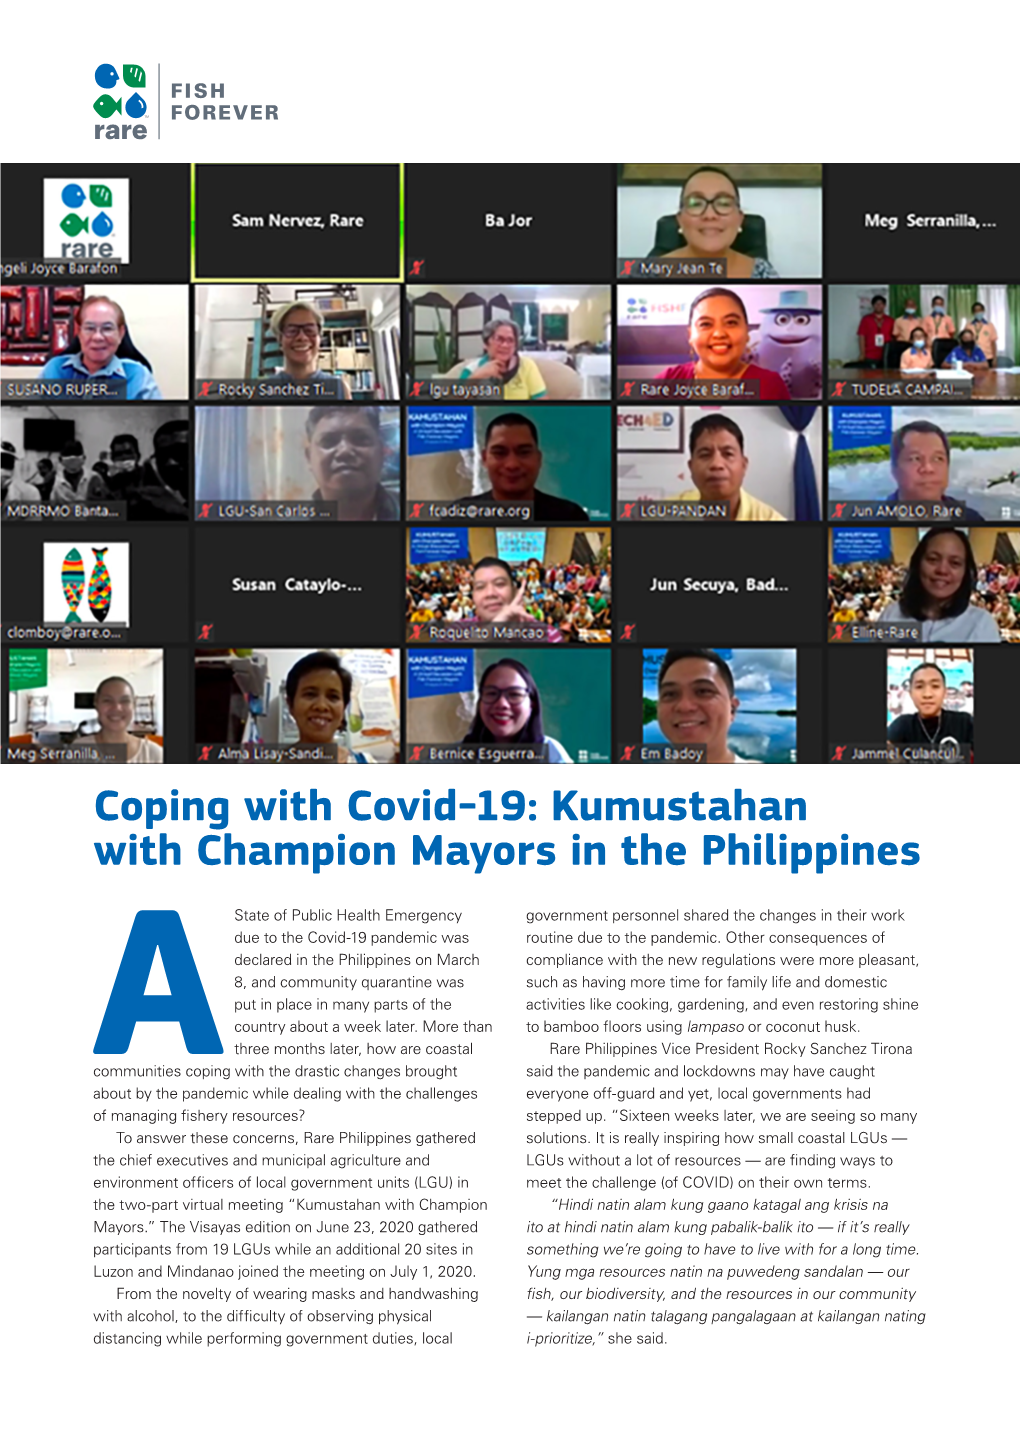 Coping with Covid-19: Kumustahan with Champion Mayors in the Philippines